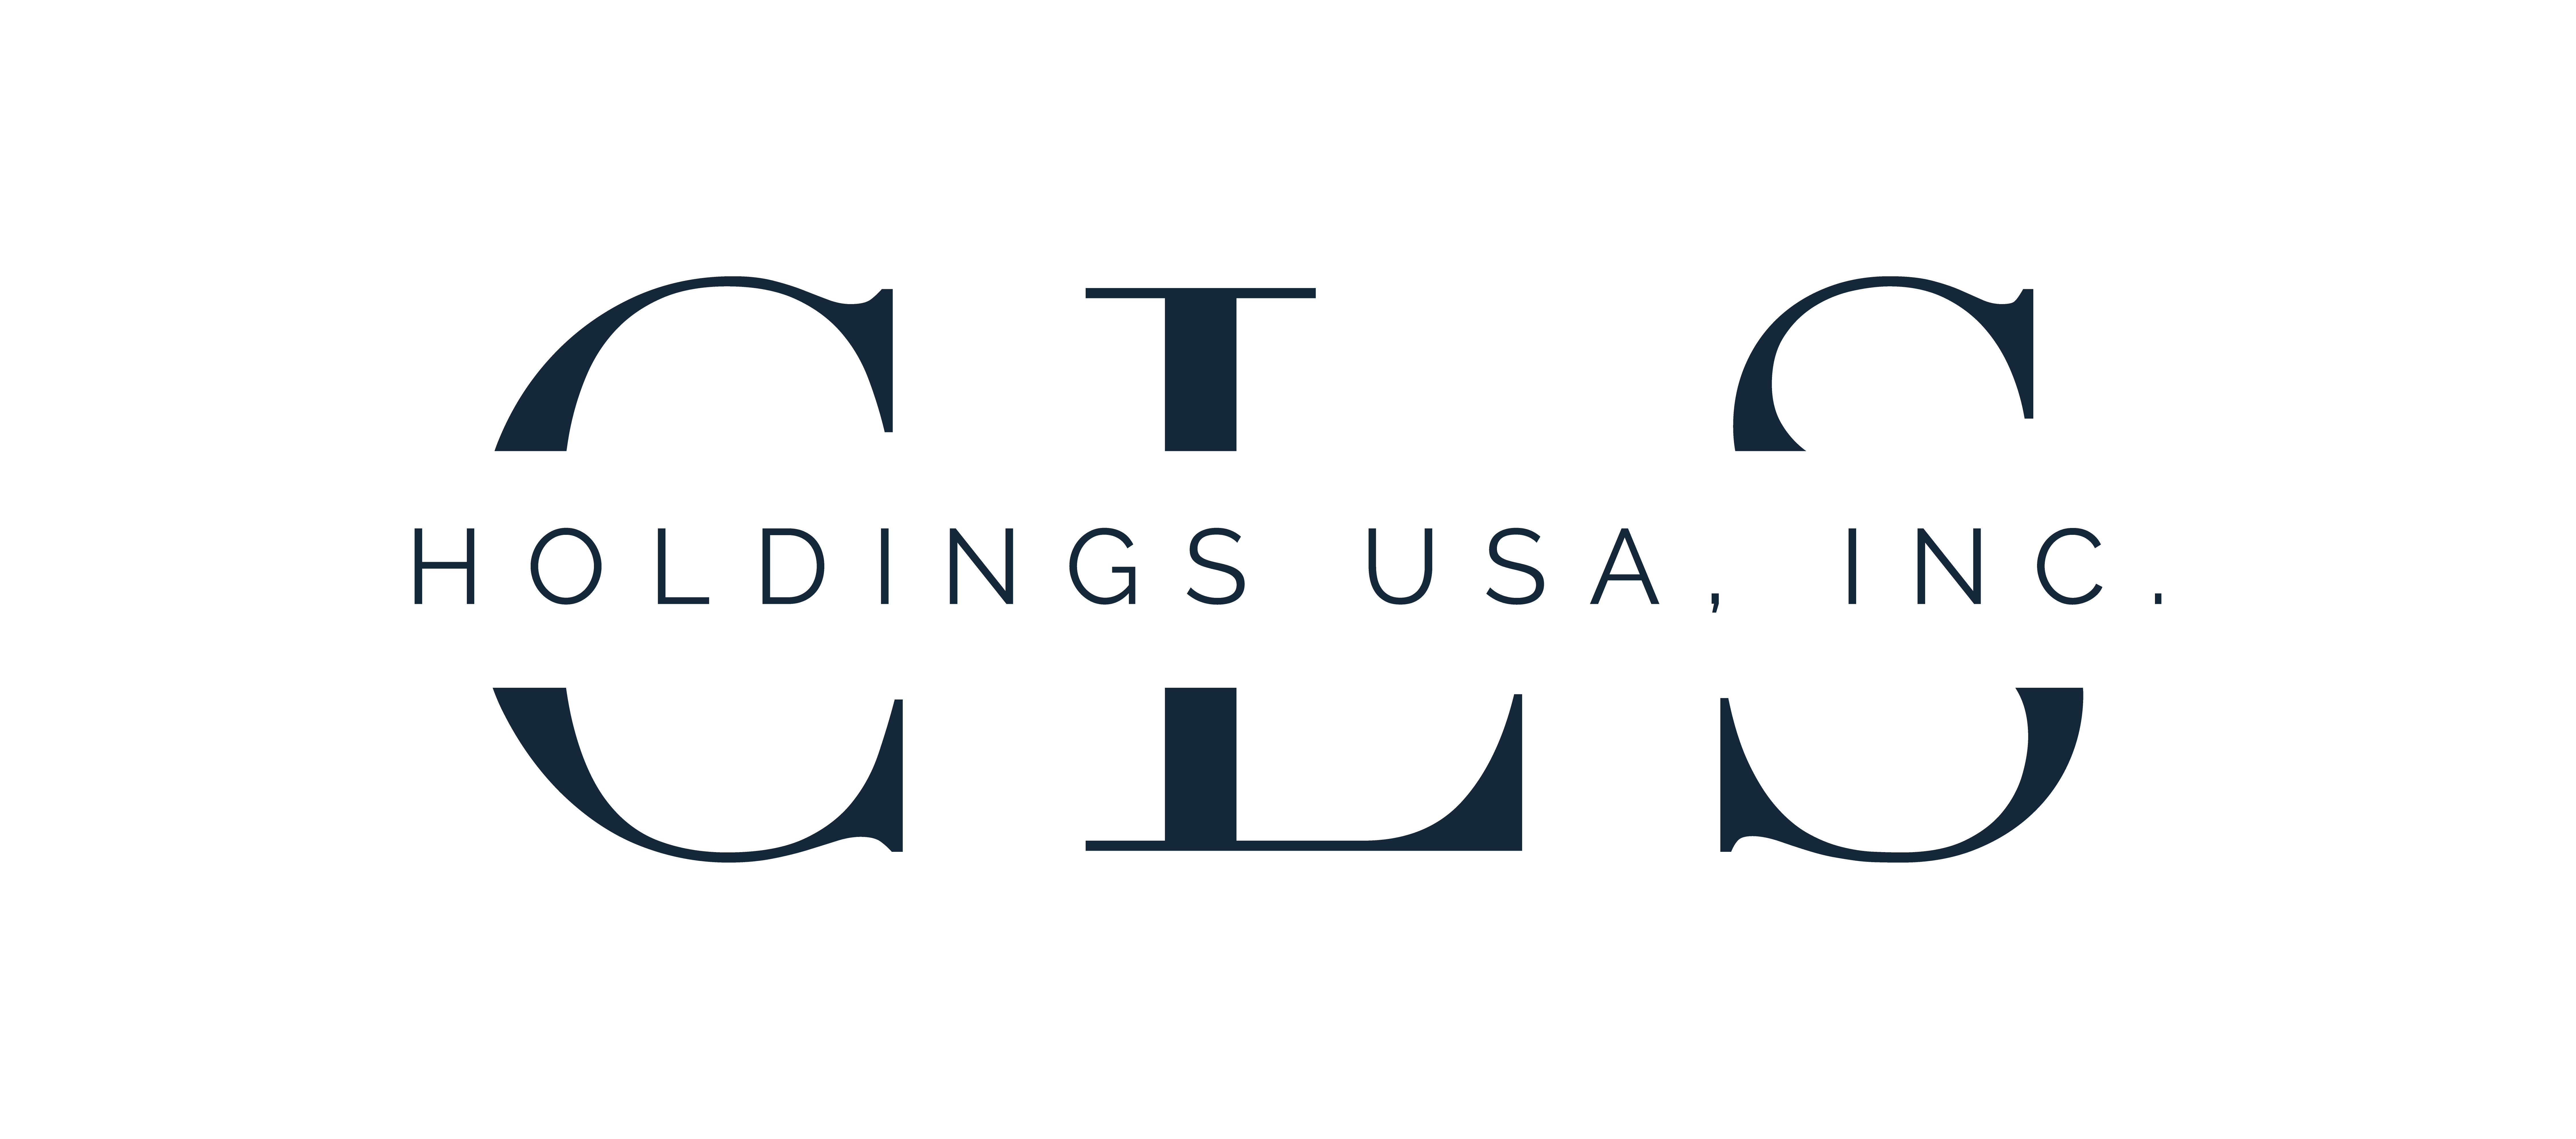 CLS Holdings USA, Inc., Wednesday, July 12, 2023, Press release picture